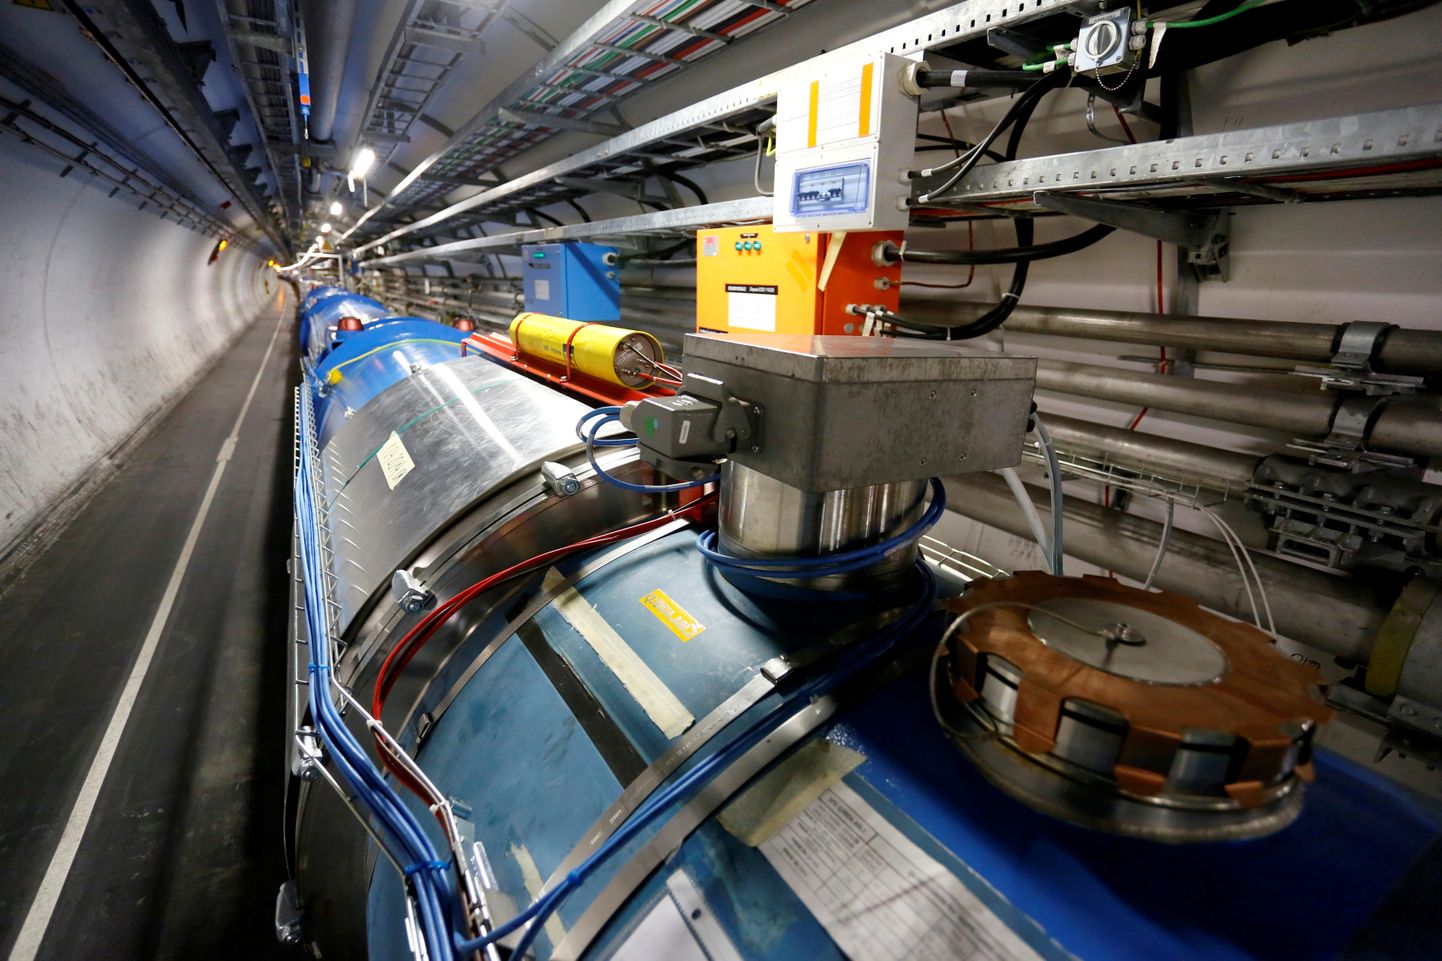 FILE PHOTO: A general view of the Large Hadron Collider (LHC) experiment is seen during a media visit to the Organization for Nuclear Research (CERN) in the French village of Saint-Genis-Pouilly, near Geneva in Switzerland, July 23, 2014. REUTERS/Pierre Albouy/File Photo